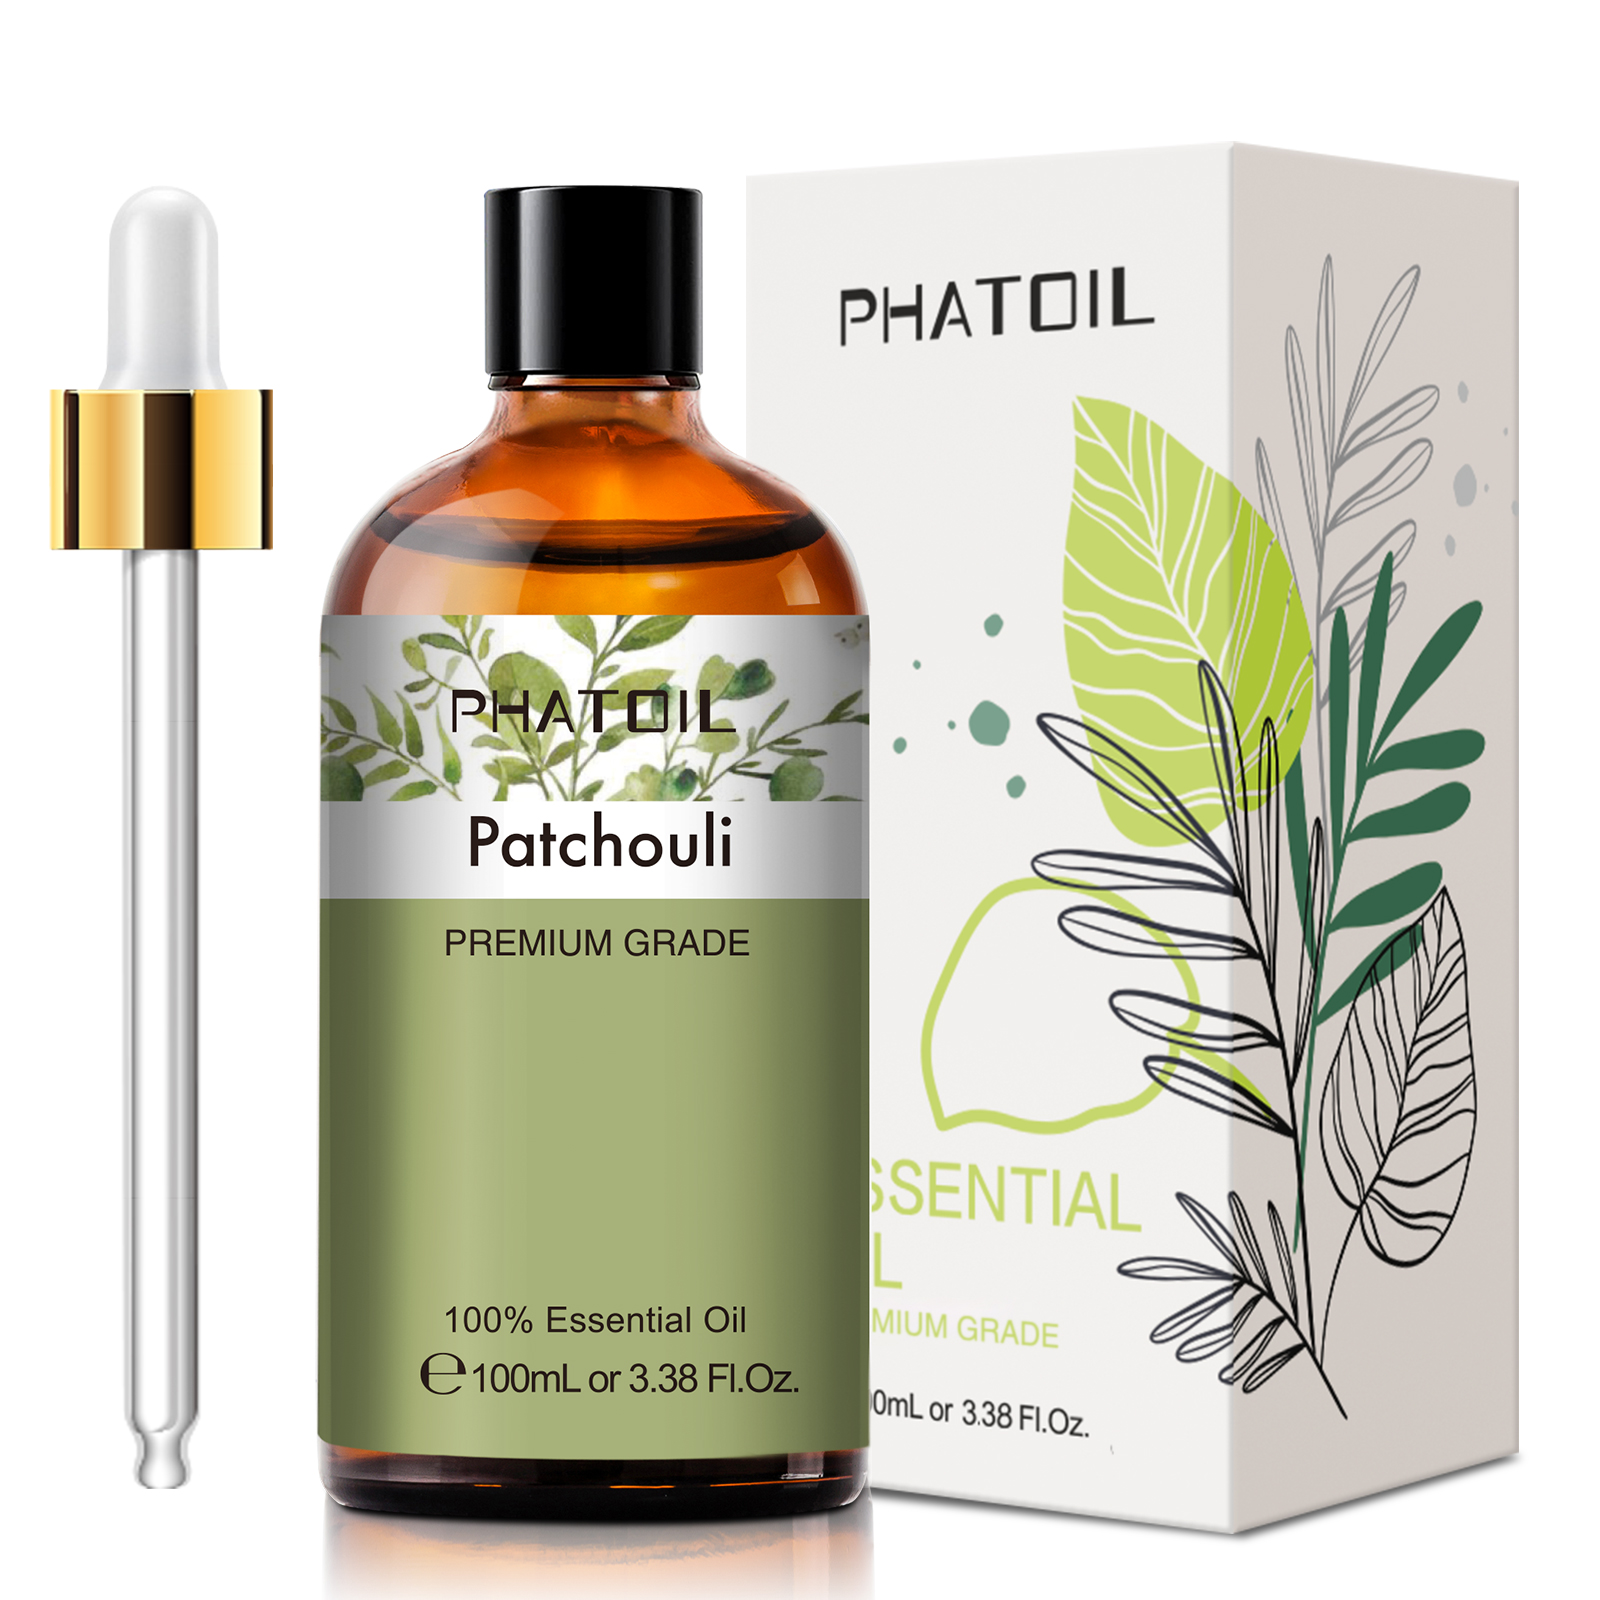 Phatoil 100ml Patchouli Essential Oil Pure Natural with Beautiful Gift Box